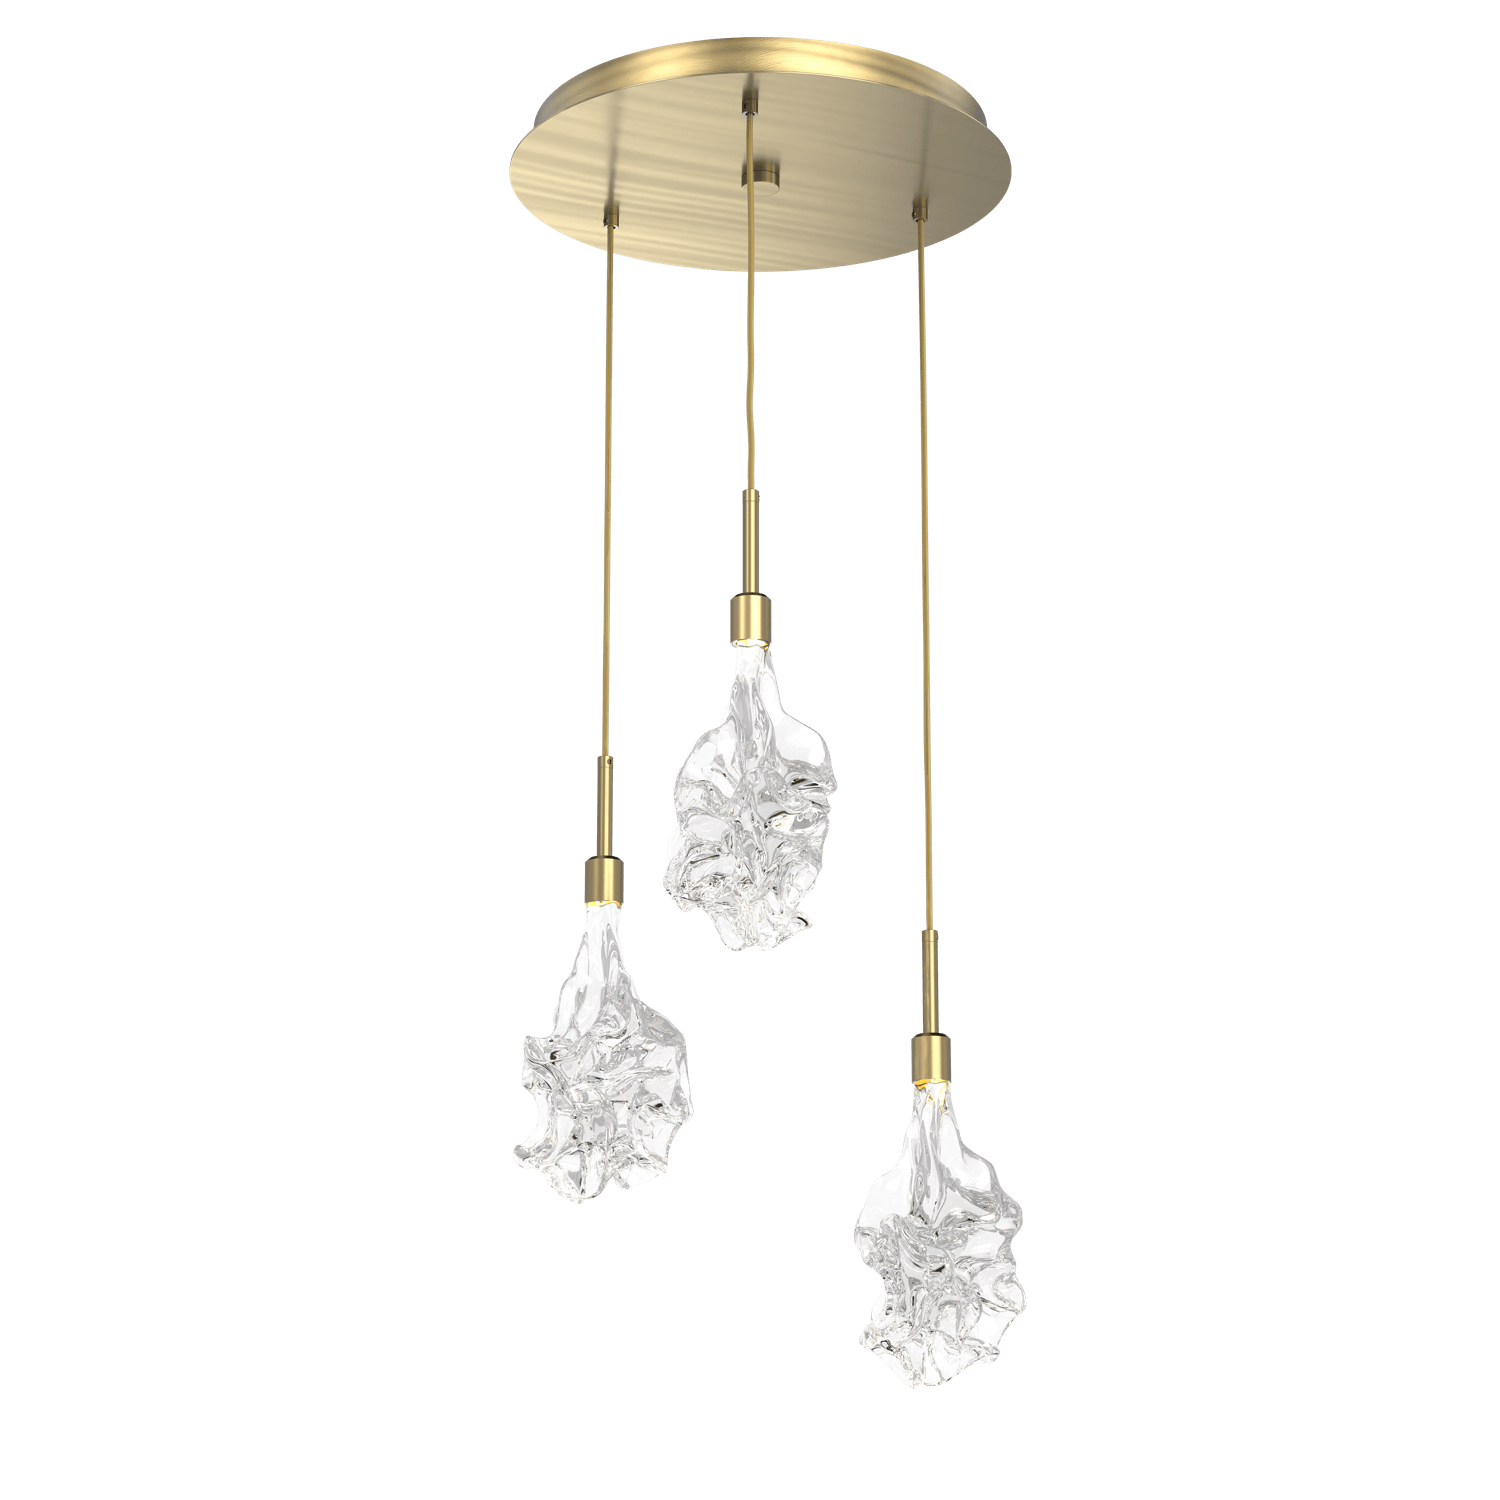 CHB0059-03-HB-Hammerton-Studio-Blossom-3-light-round-pendant-chandelier-with-heritage-brass-finish-and-clear-handblown-crystal-glass-shades-and-LED-lamping